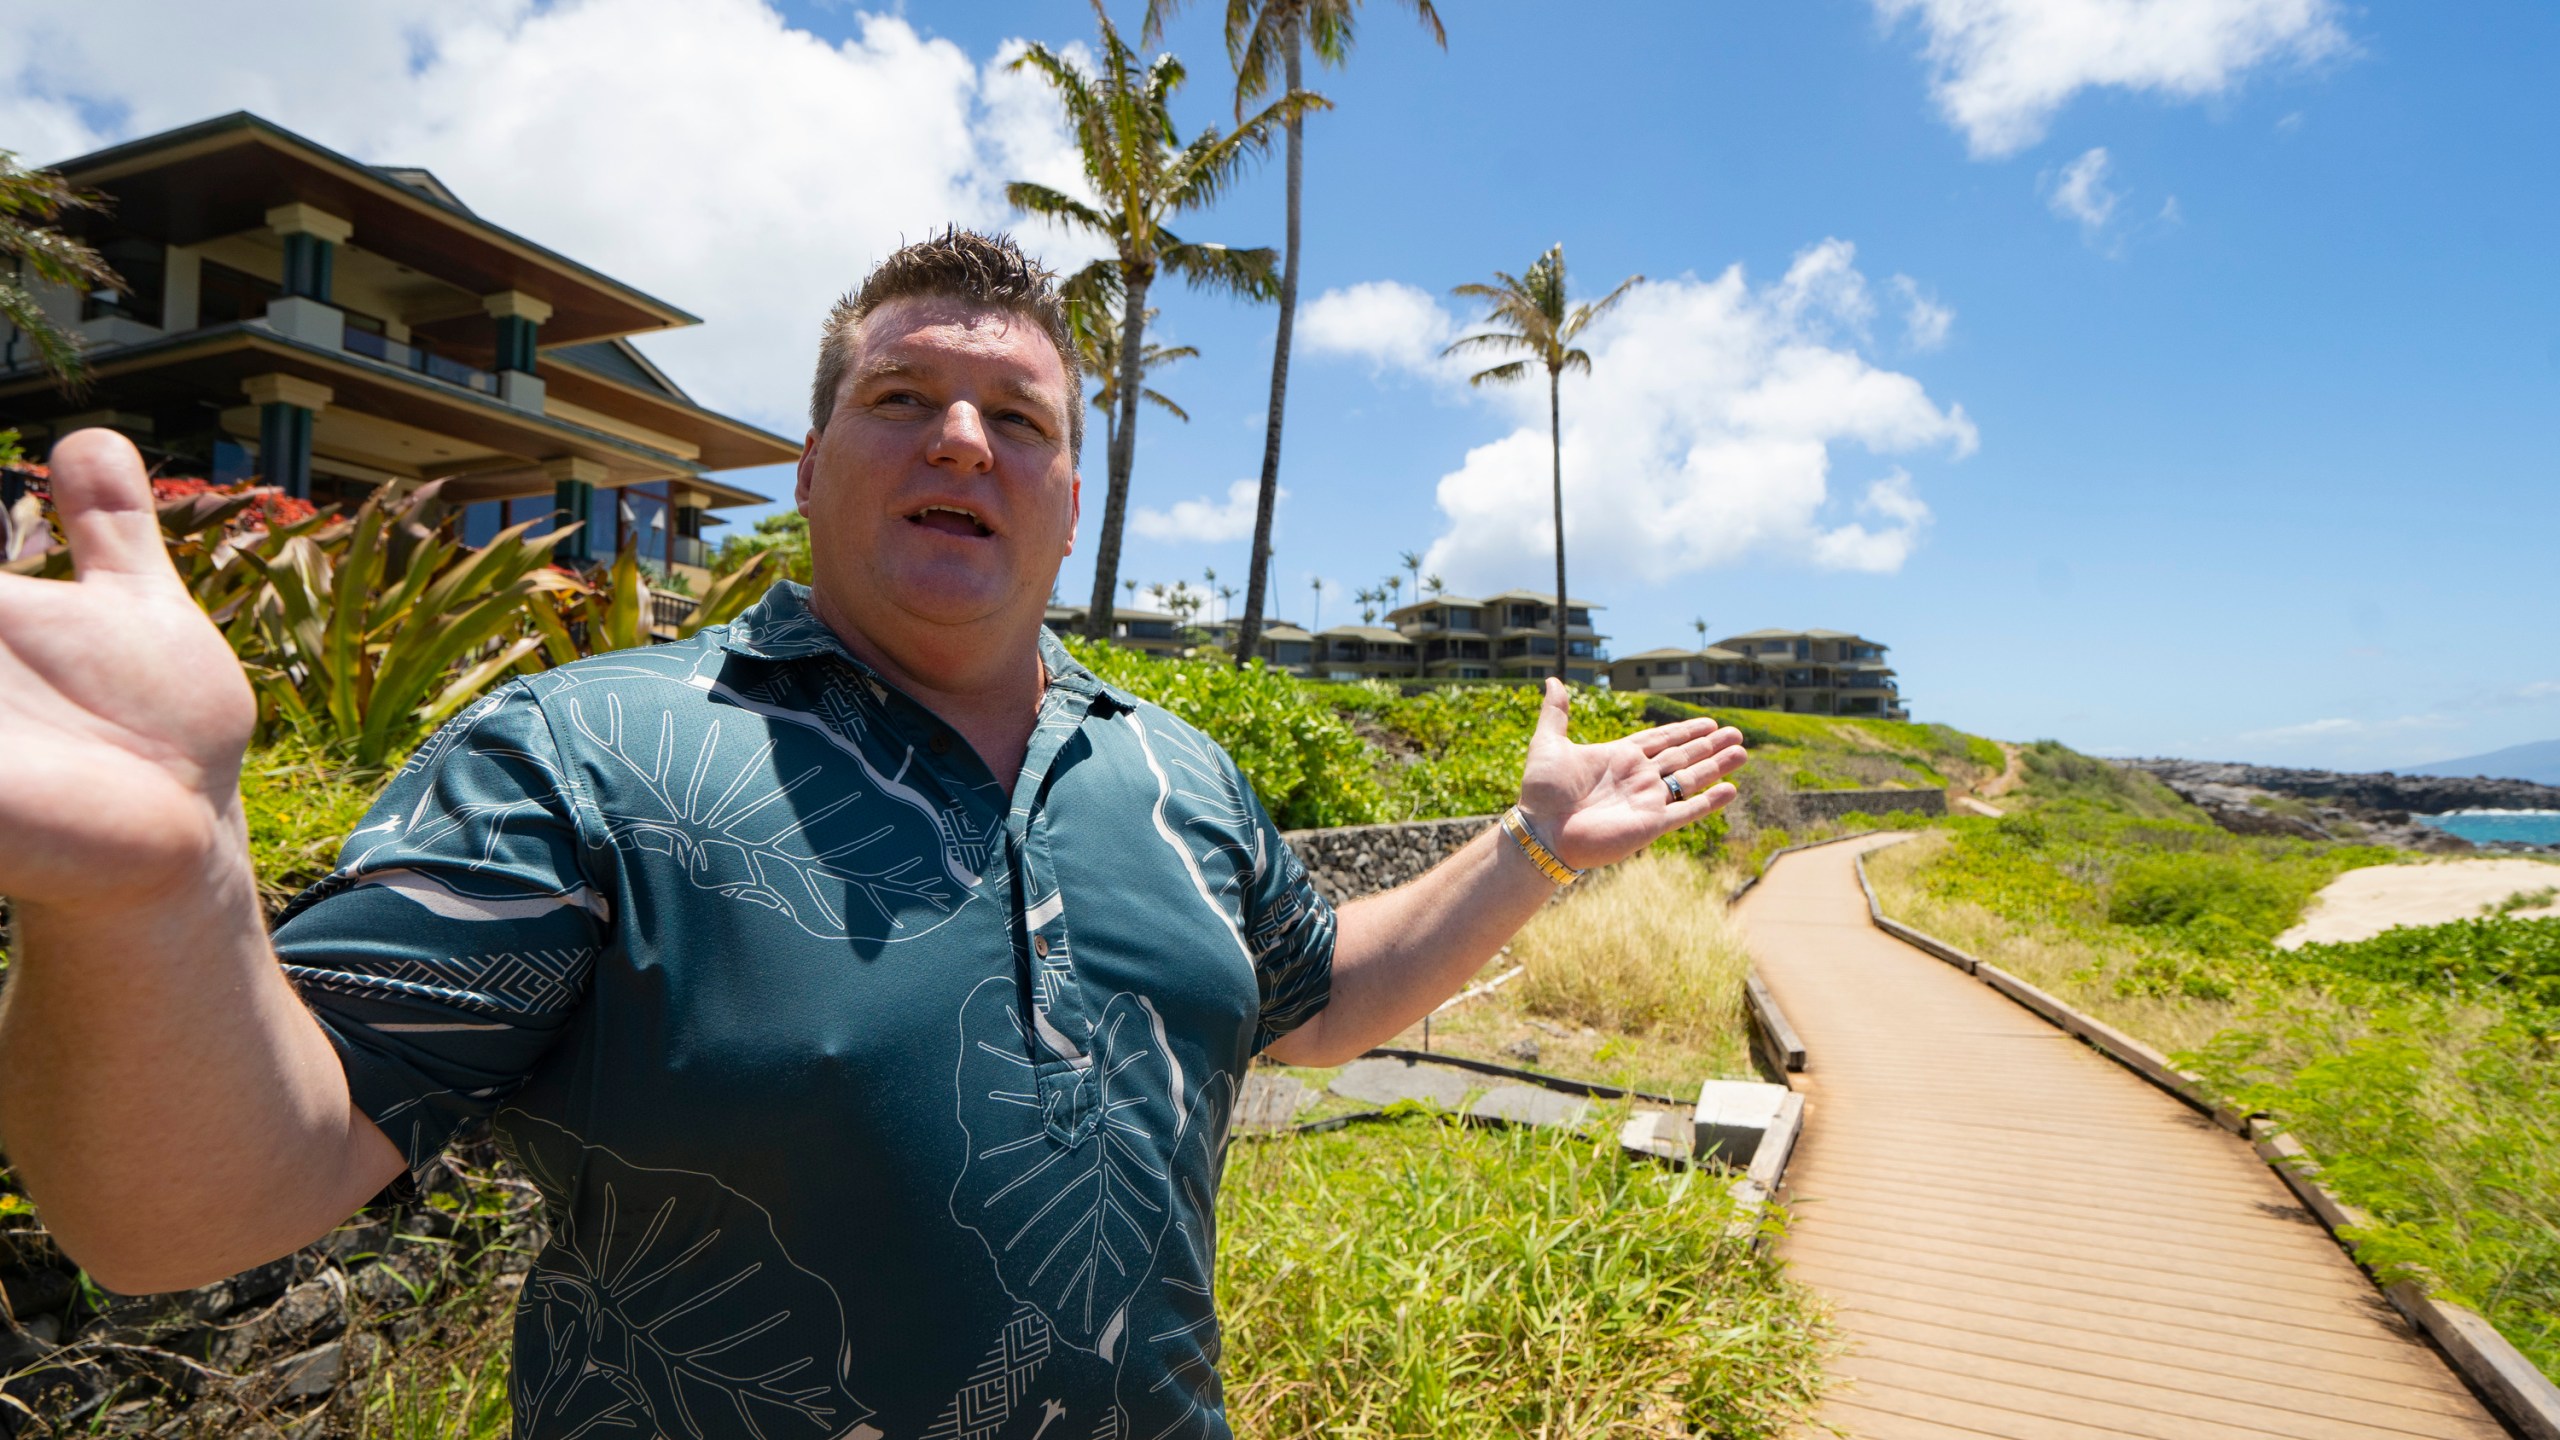 Jeremy Stice, who manages more than 40 vacation rental properties, talks about the short-term rentals along the coast at The Ridge Villas on Monday, June 24, 2024, in Lahaina, Hawaii. The mayor of Maui County in Hawaii wants to stop owners of thousands of vacation properties from renting to visitors. Instead, he wants the units rented long-term to people who live on Maui to address a chronic housing shortage that intensified after last August’s deadly wildfire. (AP Photo/Mengshin Lin)